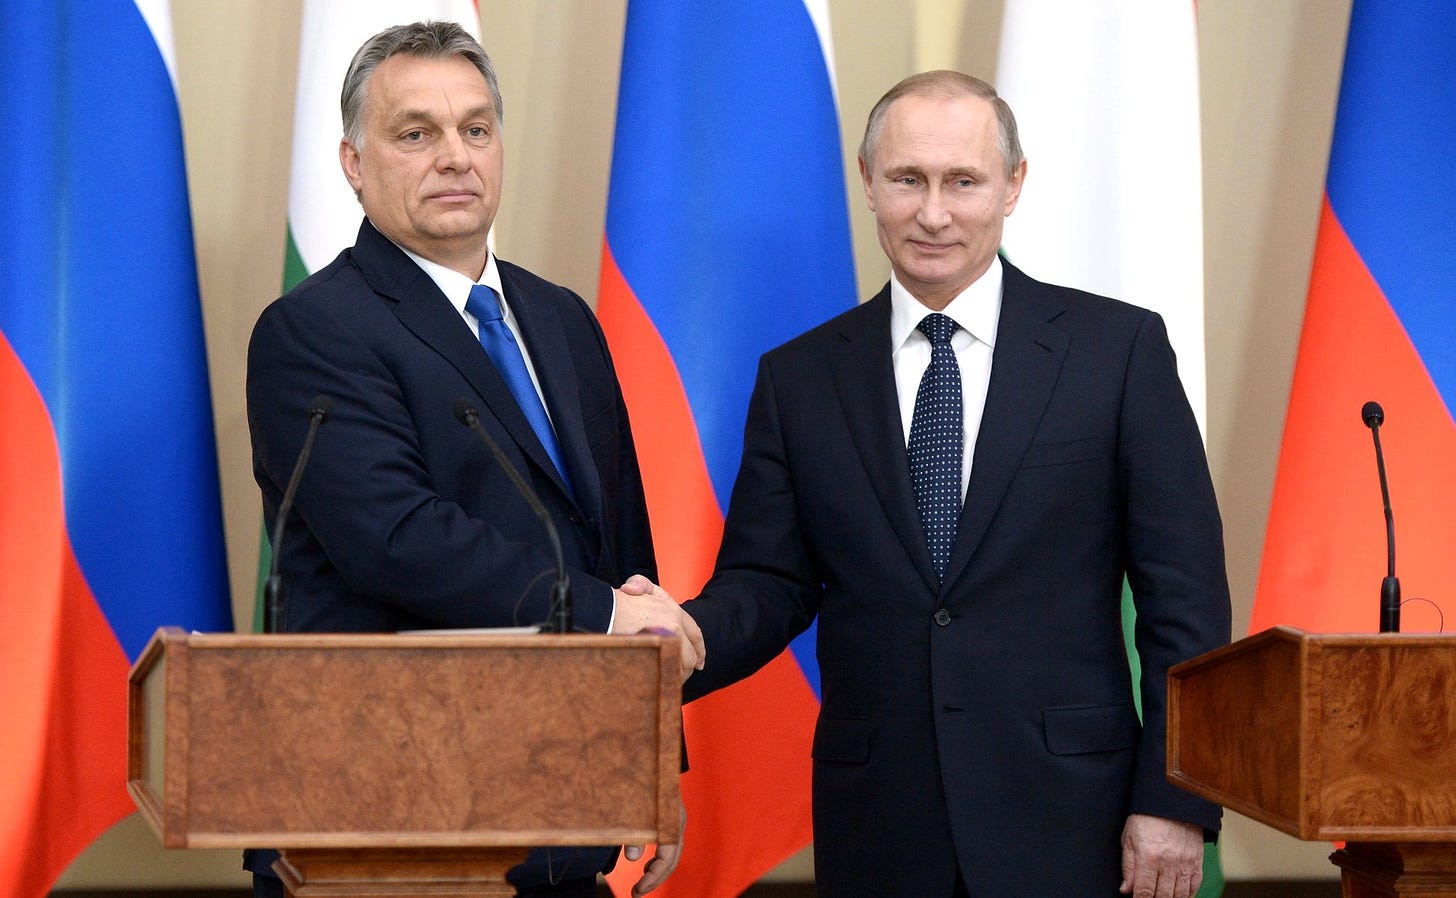 Hungarian Prime Minister Viktor Orbán (left) and Russian President Vladimir Putin (Image: Kremlin.ru/Press Services of the President of the Russian Federation, CC BY 4.0, via Wikimedia Commons)